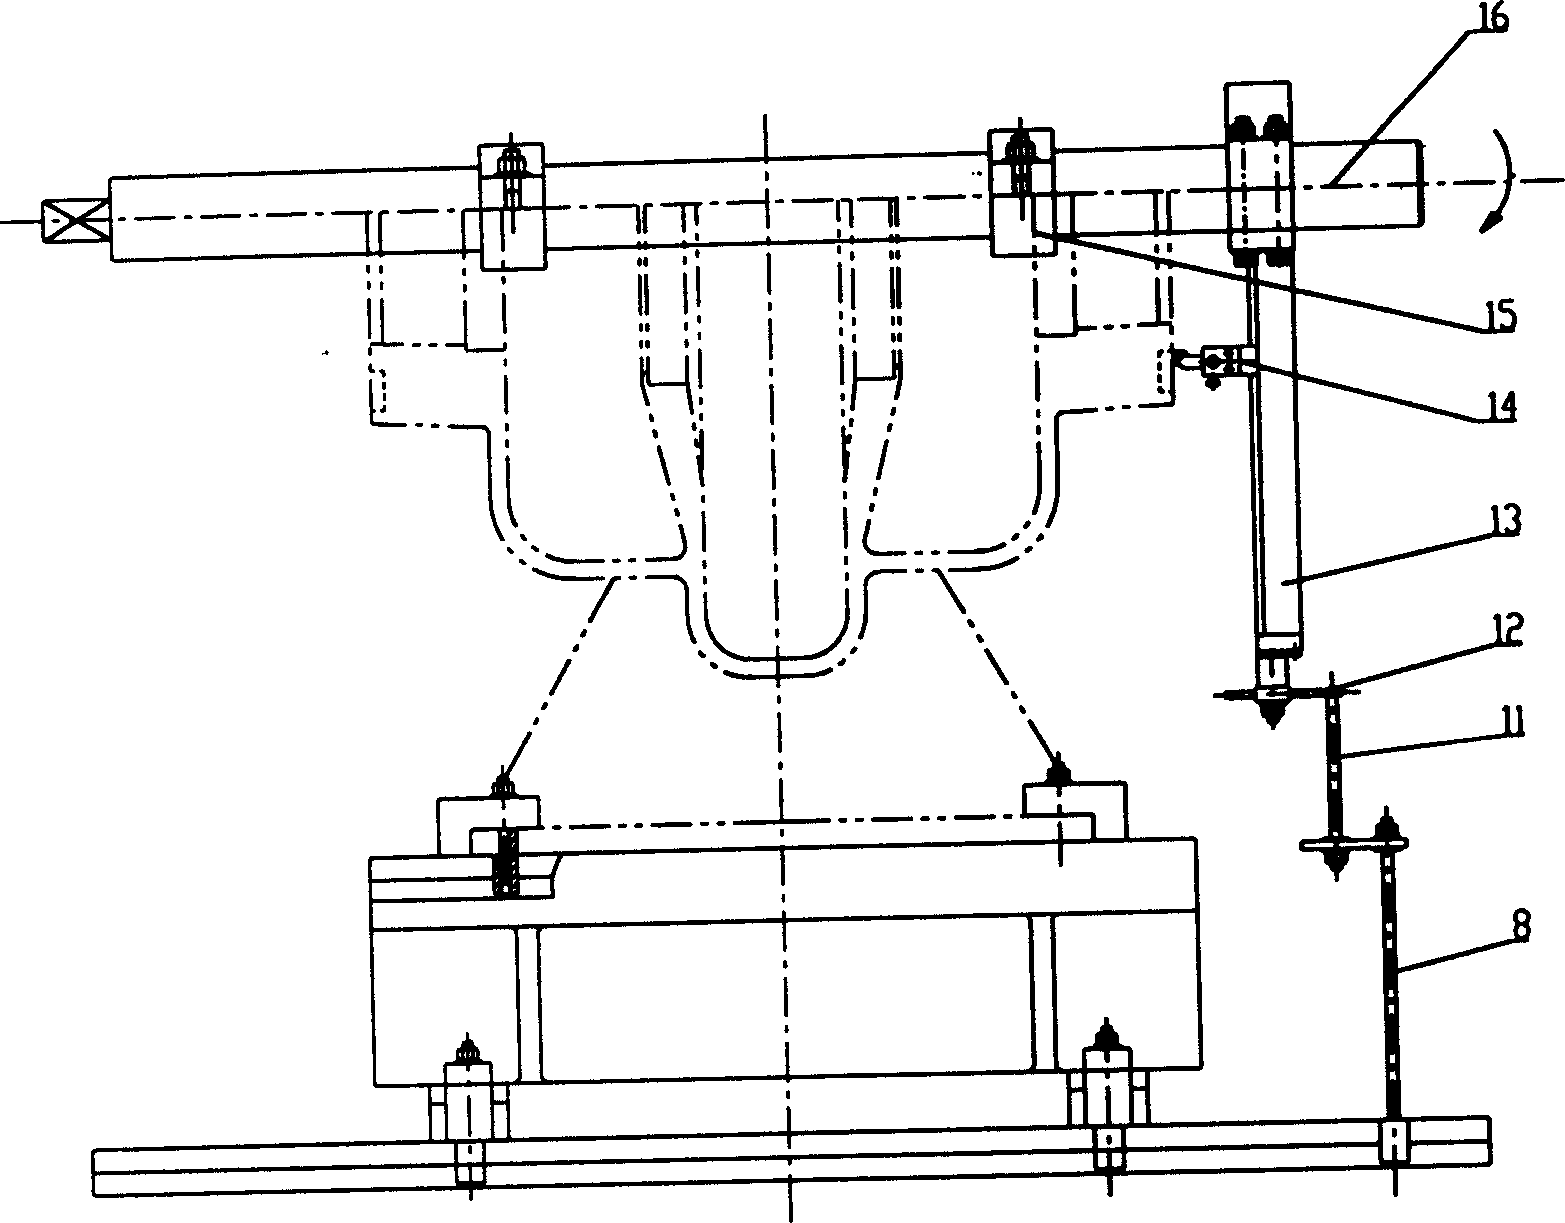 Process for machining ends, positioning ports and holes of central opened pump by special boring apparatus